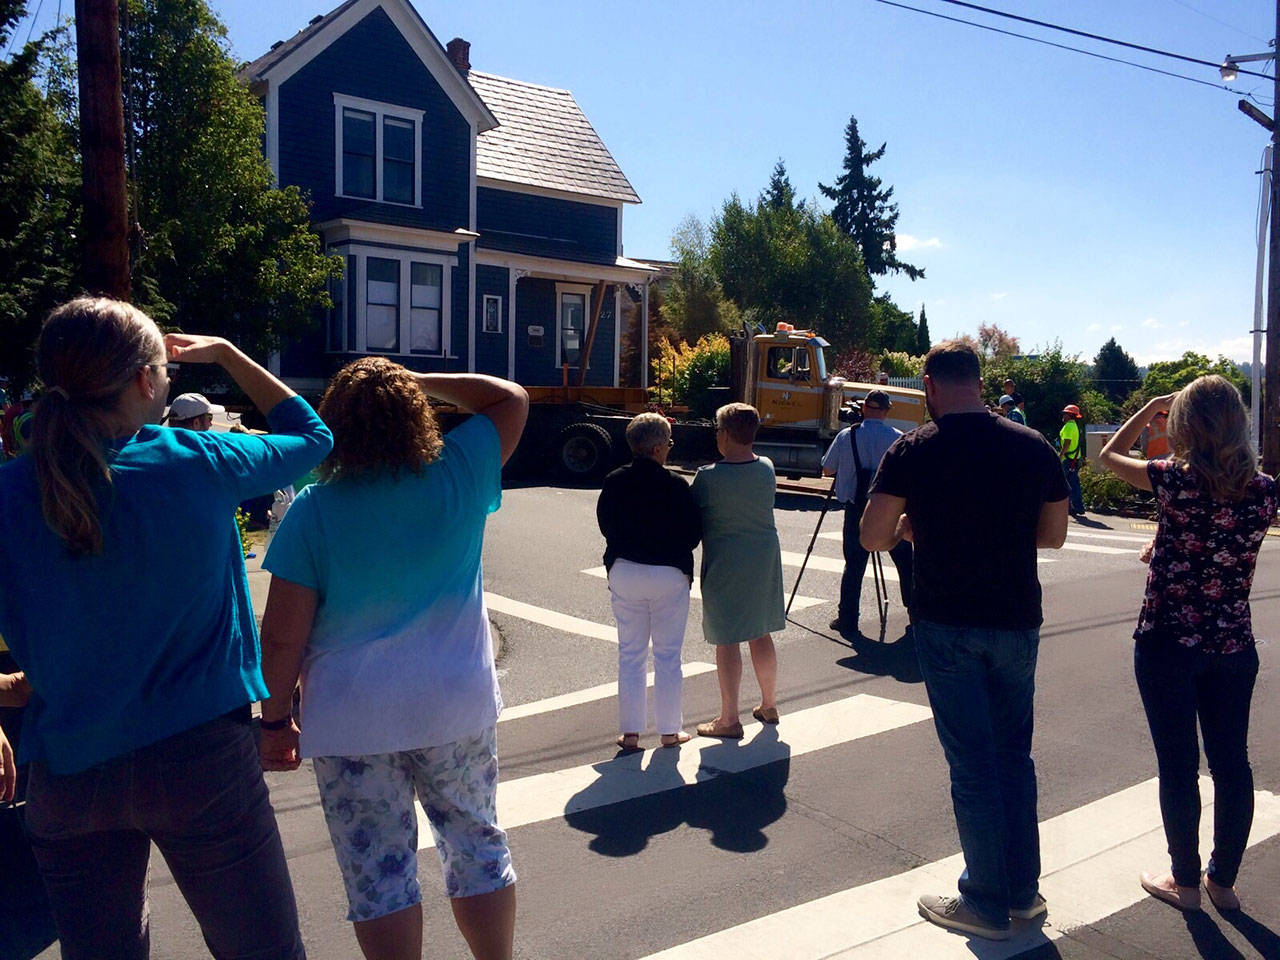 Neighbors watch the house be moved to a temporary location in August 2016. Photo courtesy of the city of Kirkland